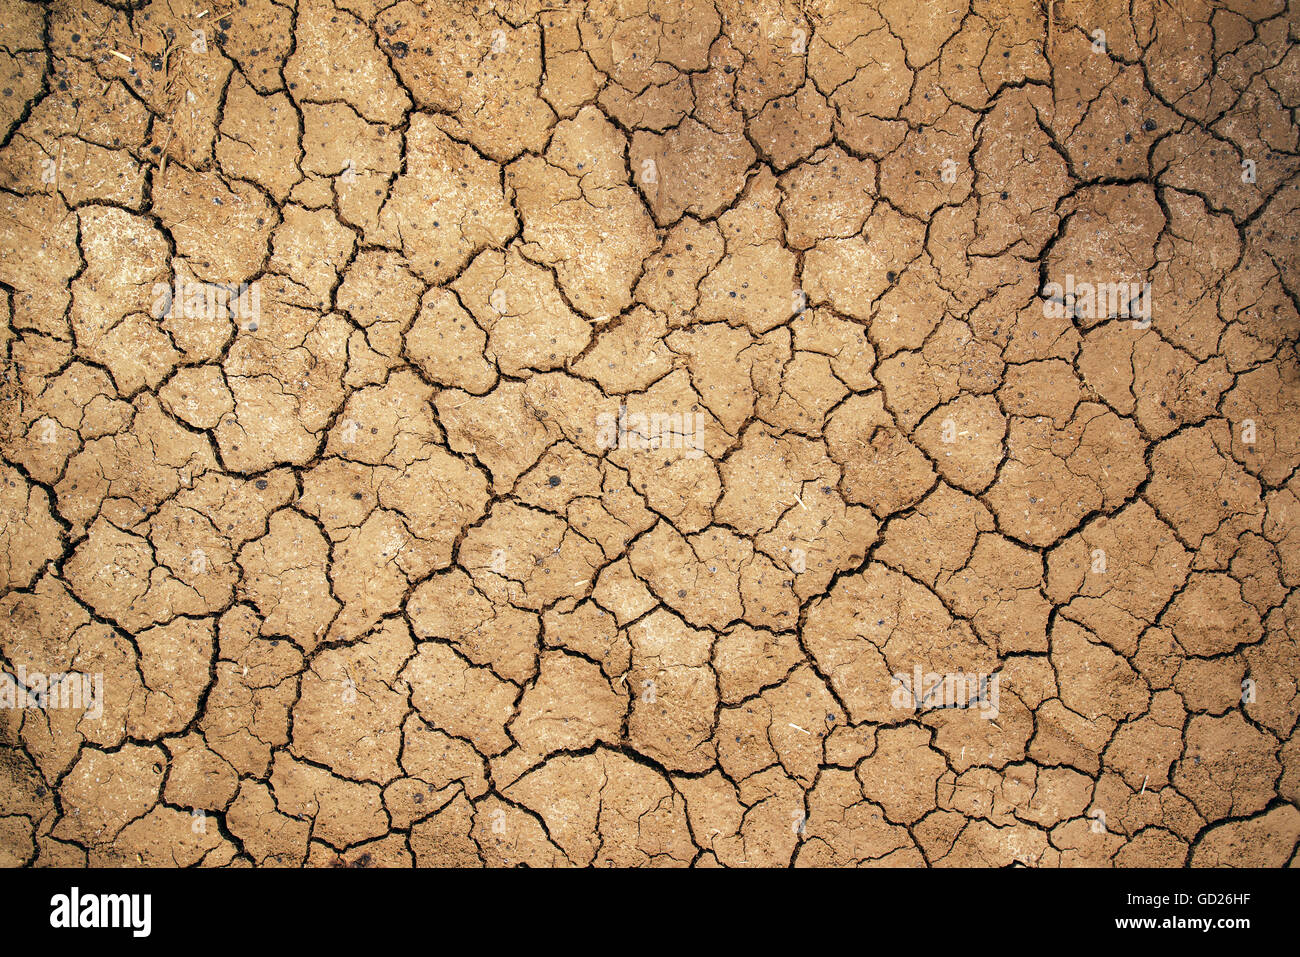 Mud cracks in dry earth texture, arable soil during dry season in nature as weather or climate change background Stock Photo